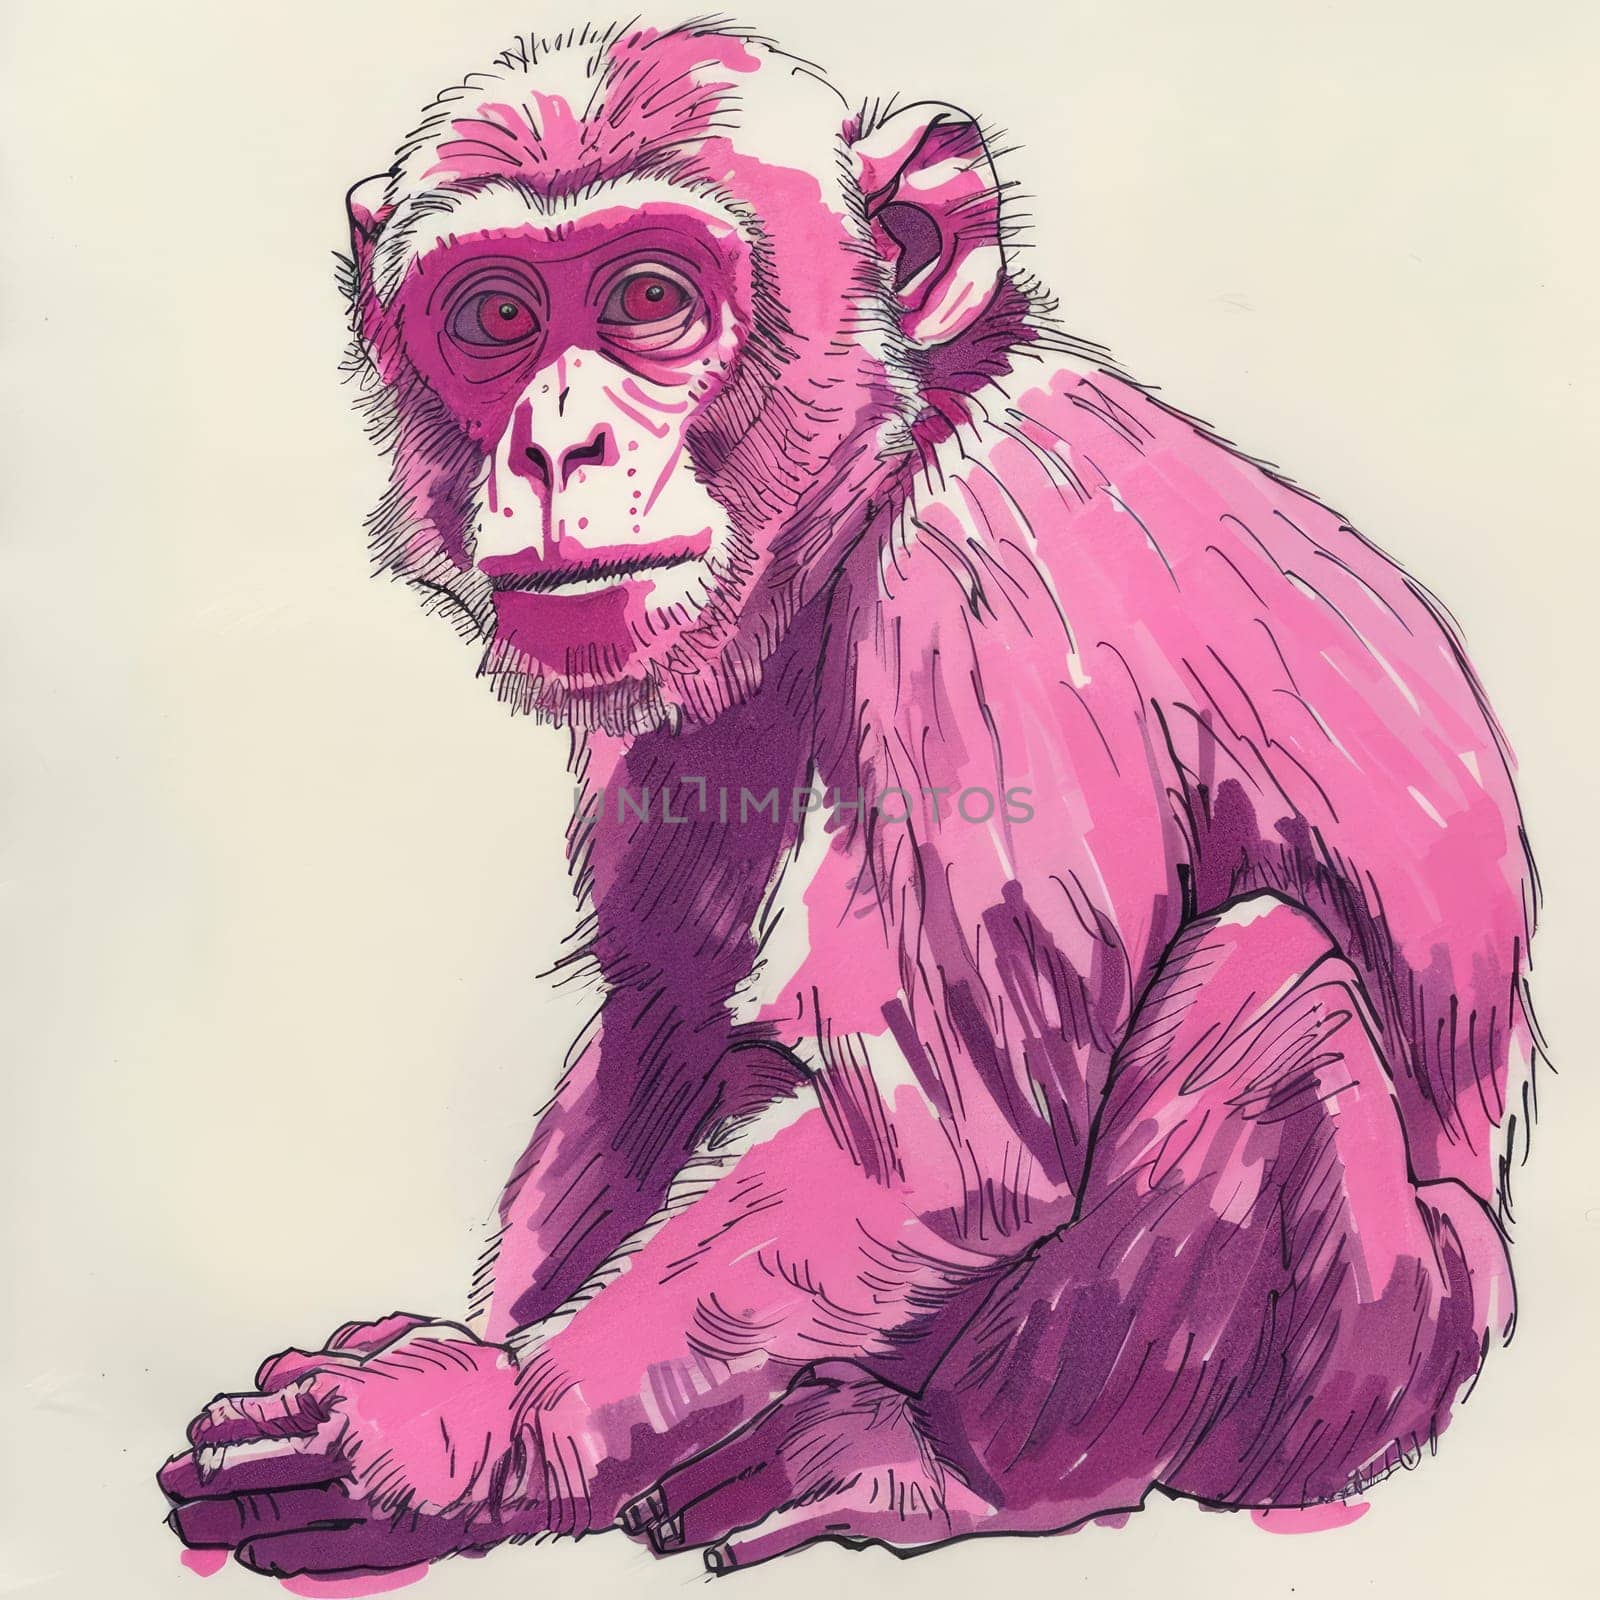 Drawing of a monkey made with a pink water marker on paper by natali_brill